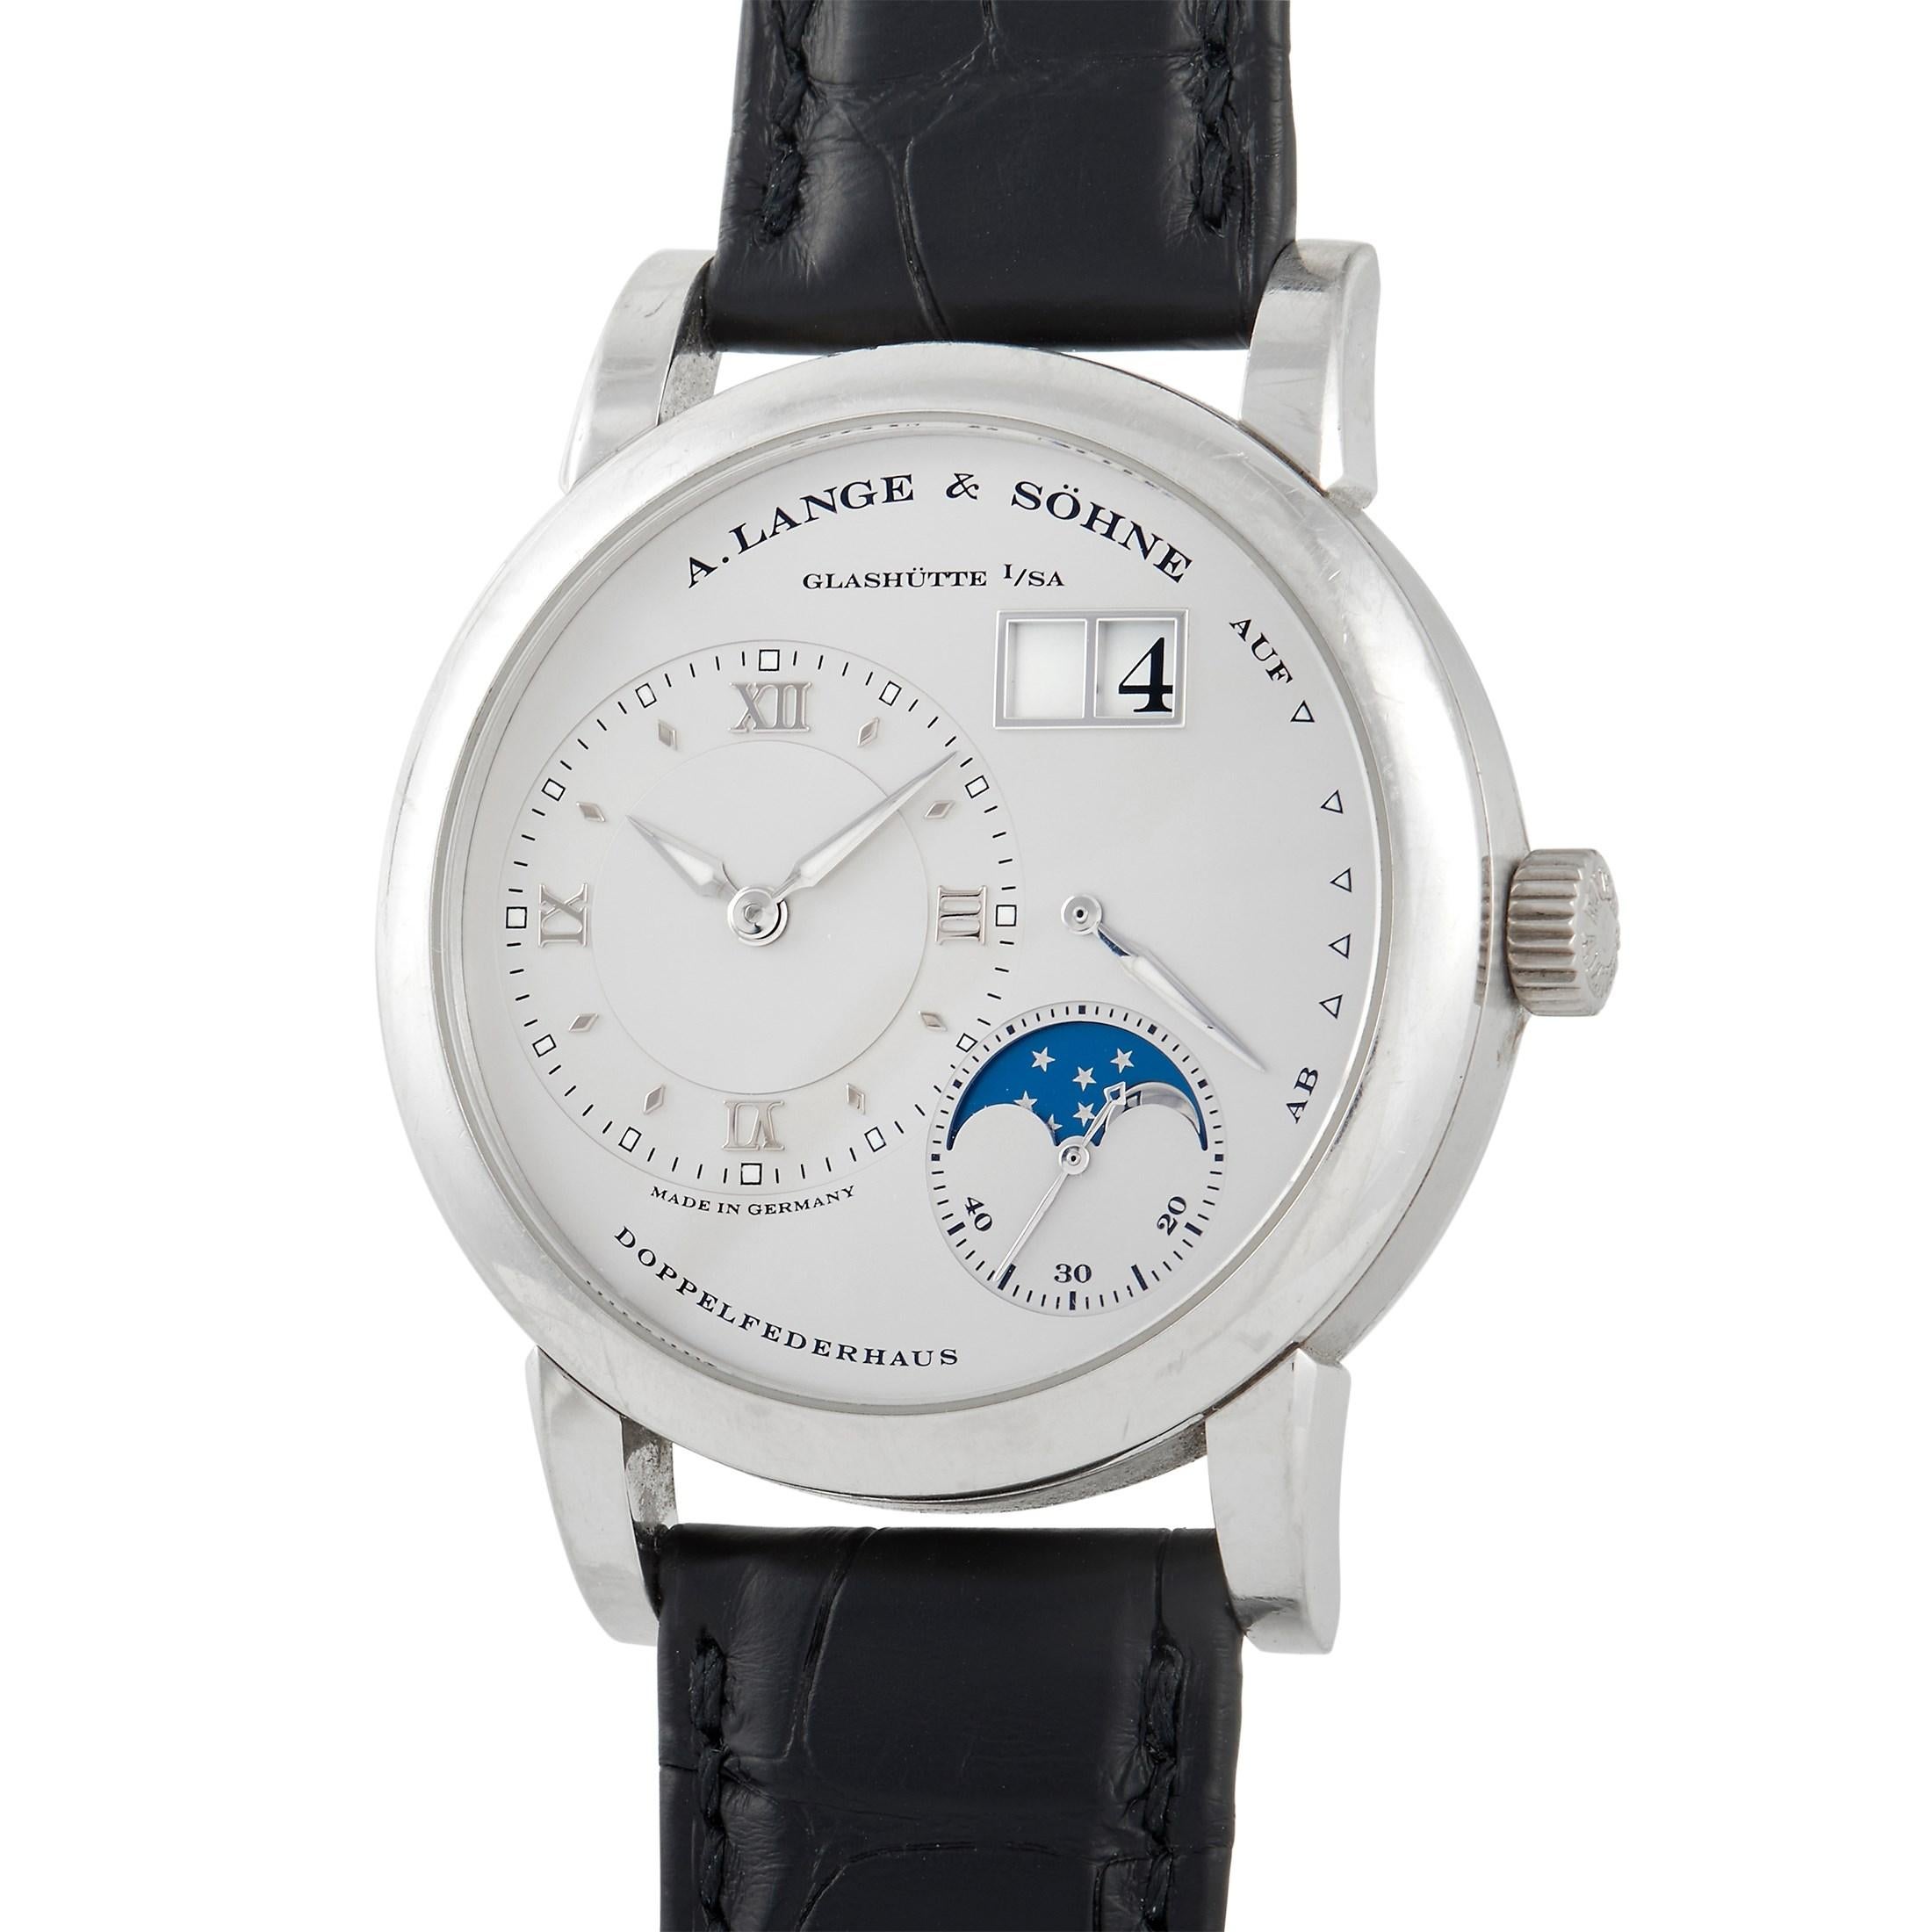 A handsome, accurate, and reliable timepiece from a reputable German manufacturer of luxury watches. The A. Lange & Söhne Lange 1 Moon Phase Platinum Watch 109.025 features a polished platinum case with the edges in fine satin finish. The dial is